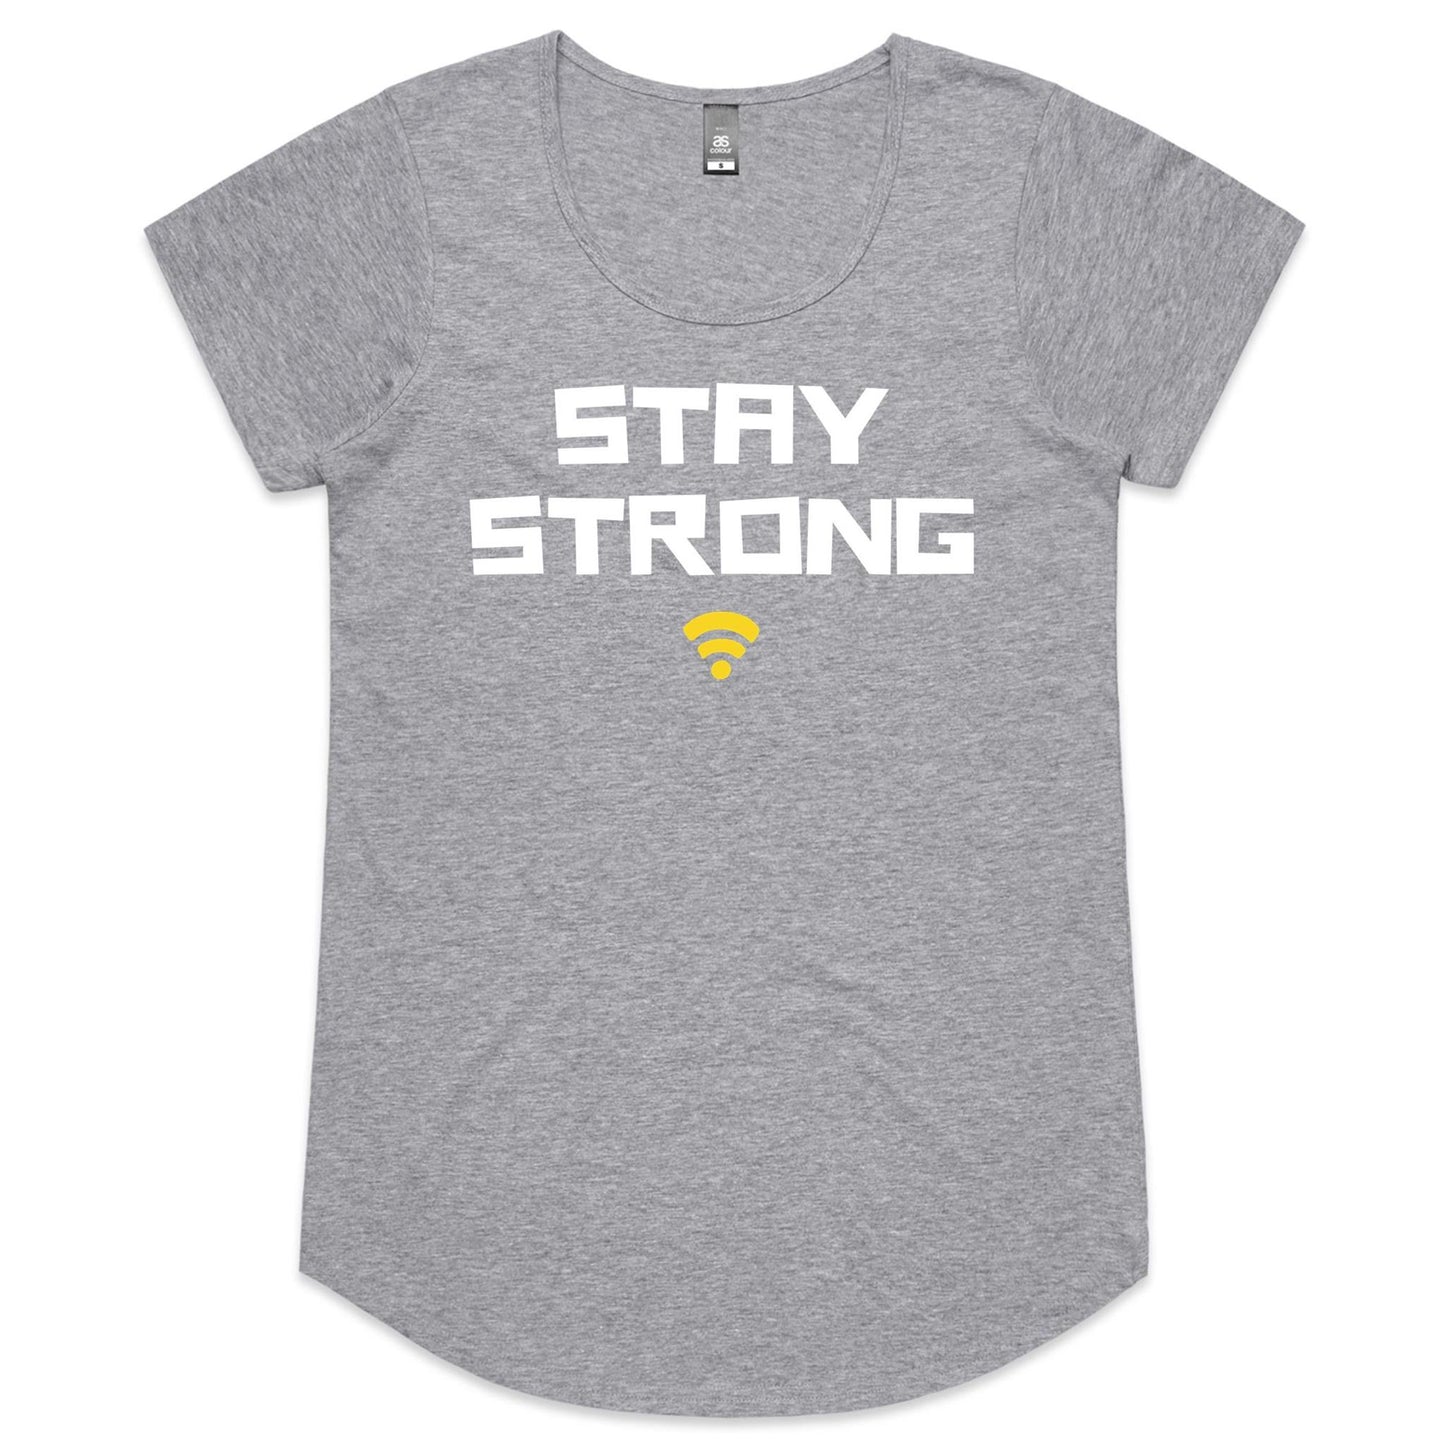 Stay Strong - Womens Scoop Neck T-Shirt Grey Marle Womens Scoop Neck T-shirt Tech